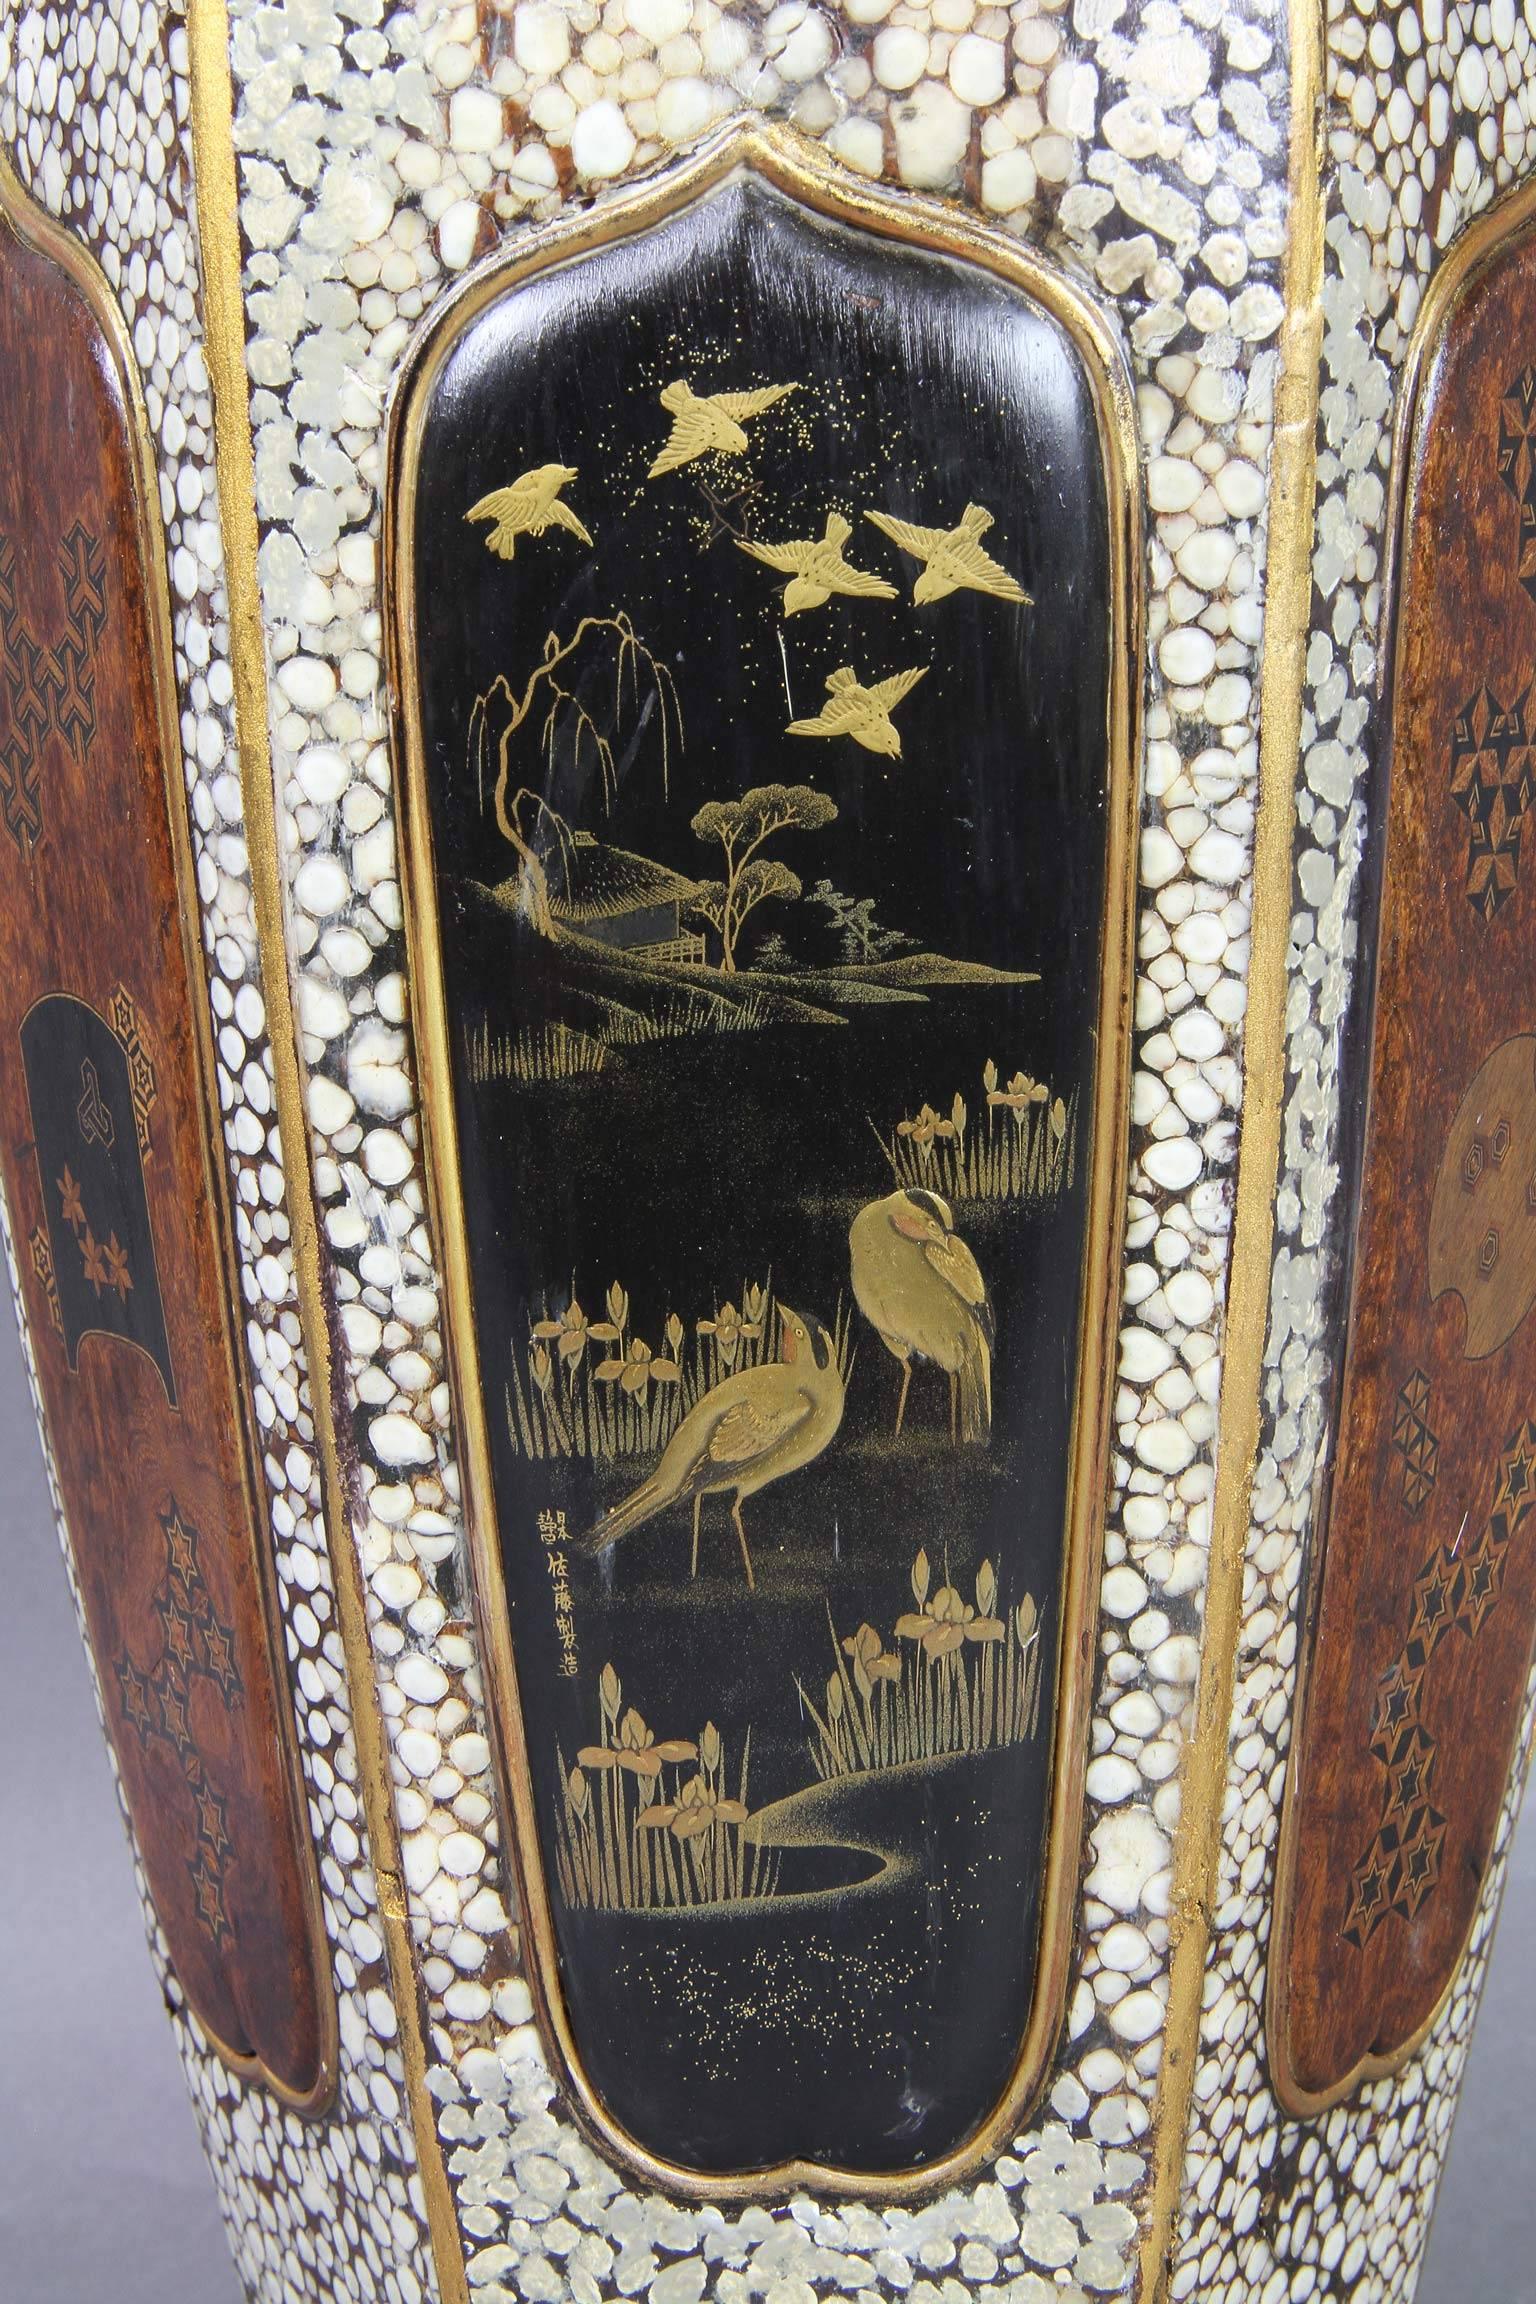 19th Century Japanese Shagreen, Lacquer and Inlaid Wood Vase